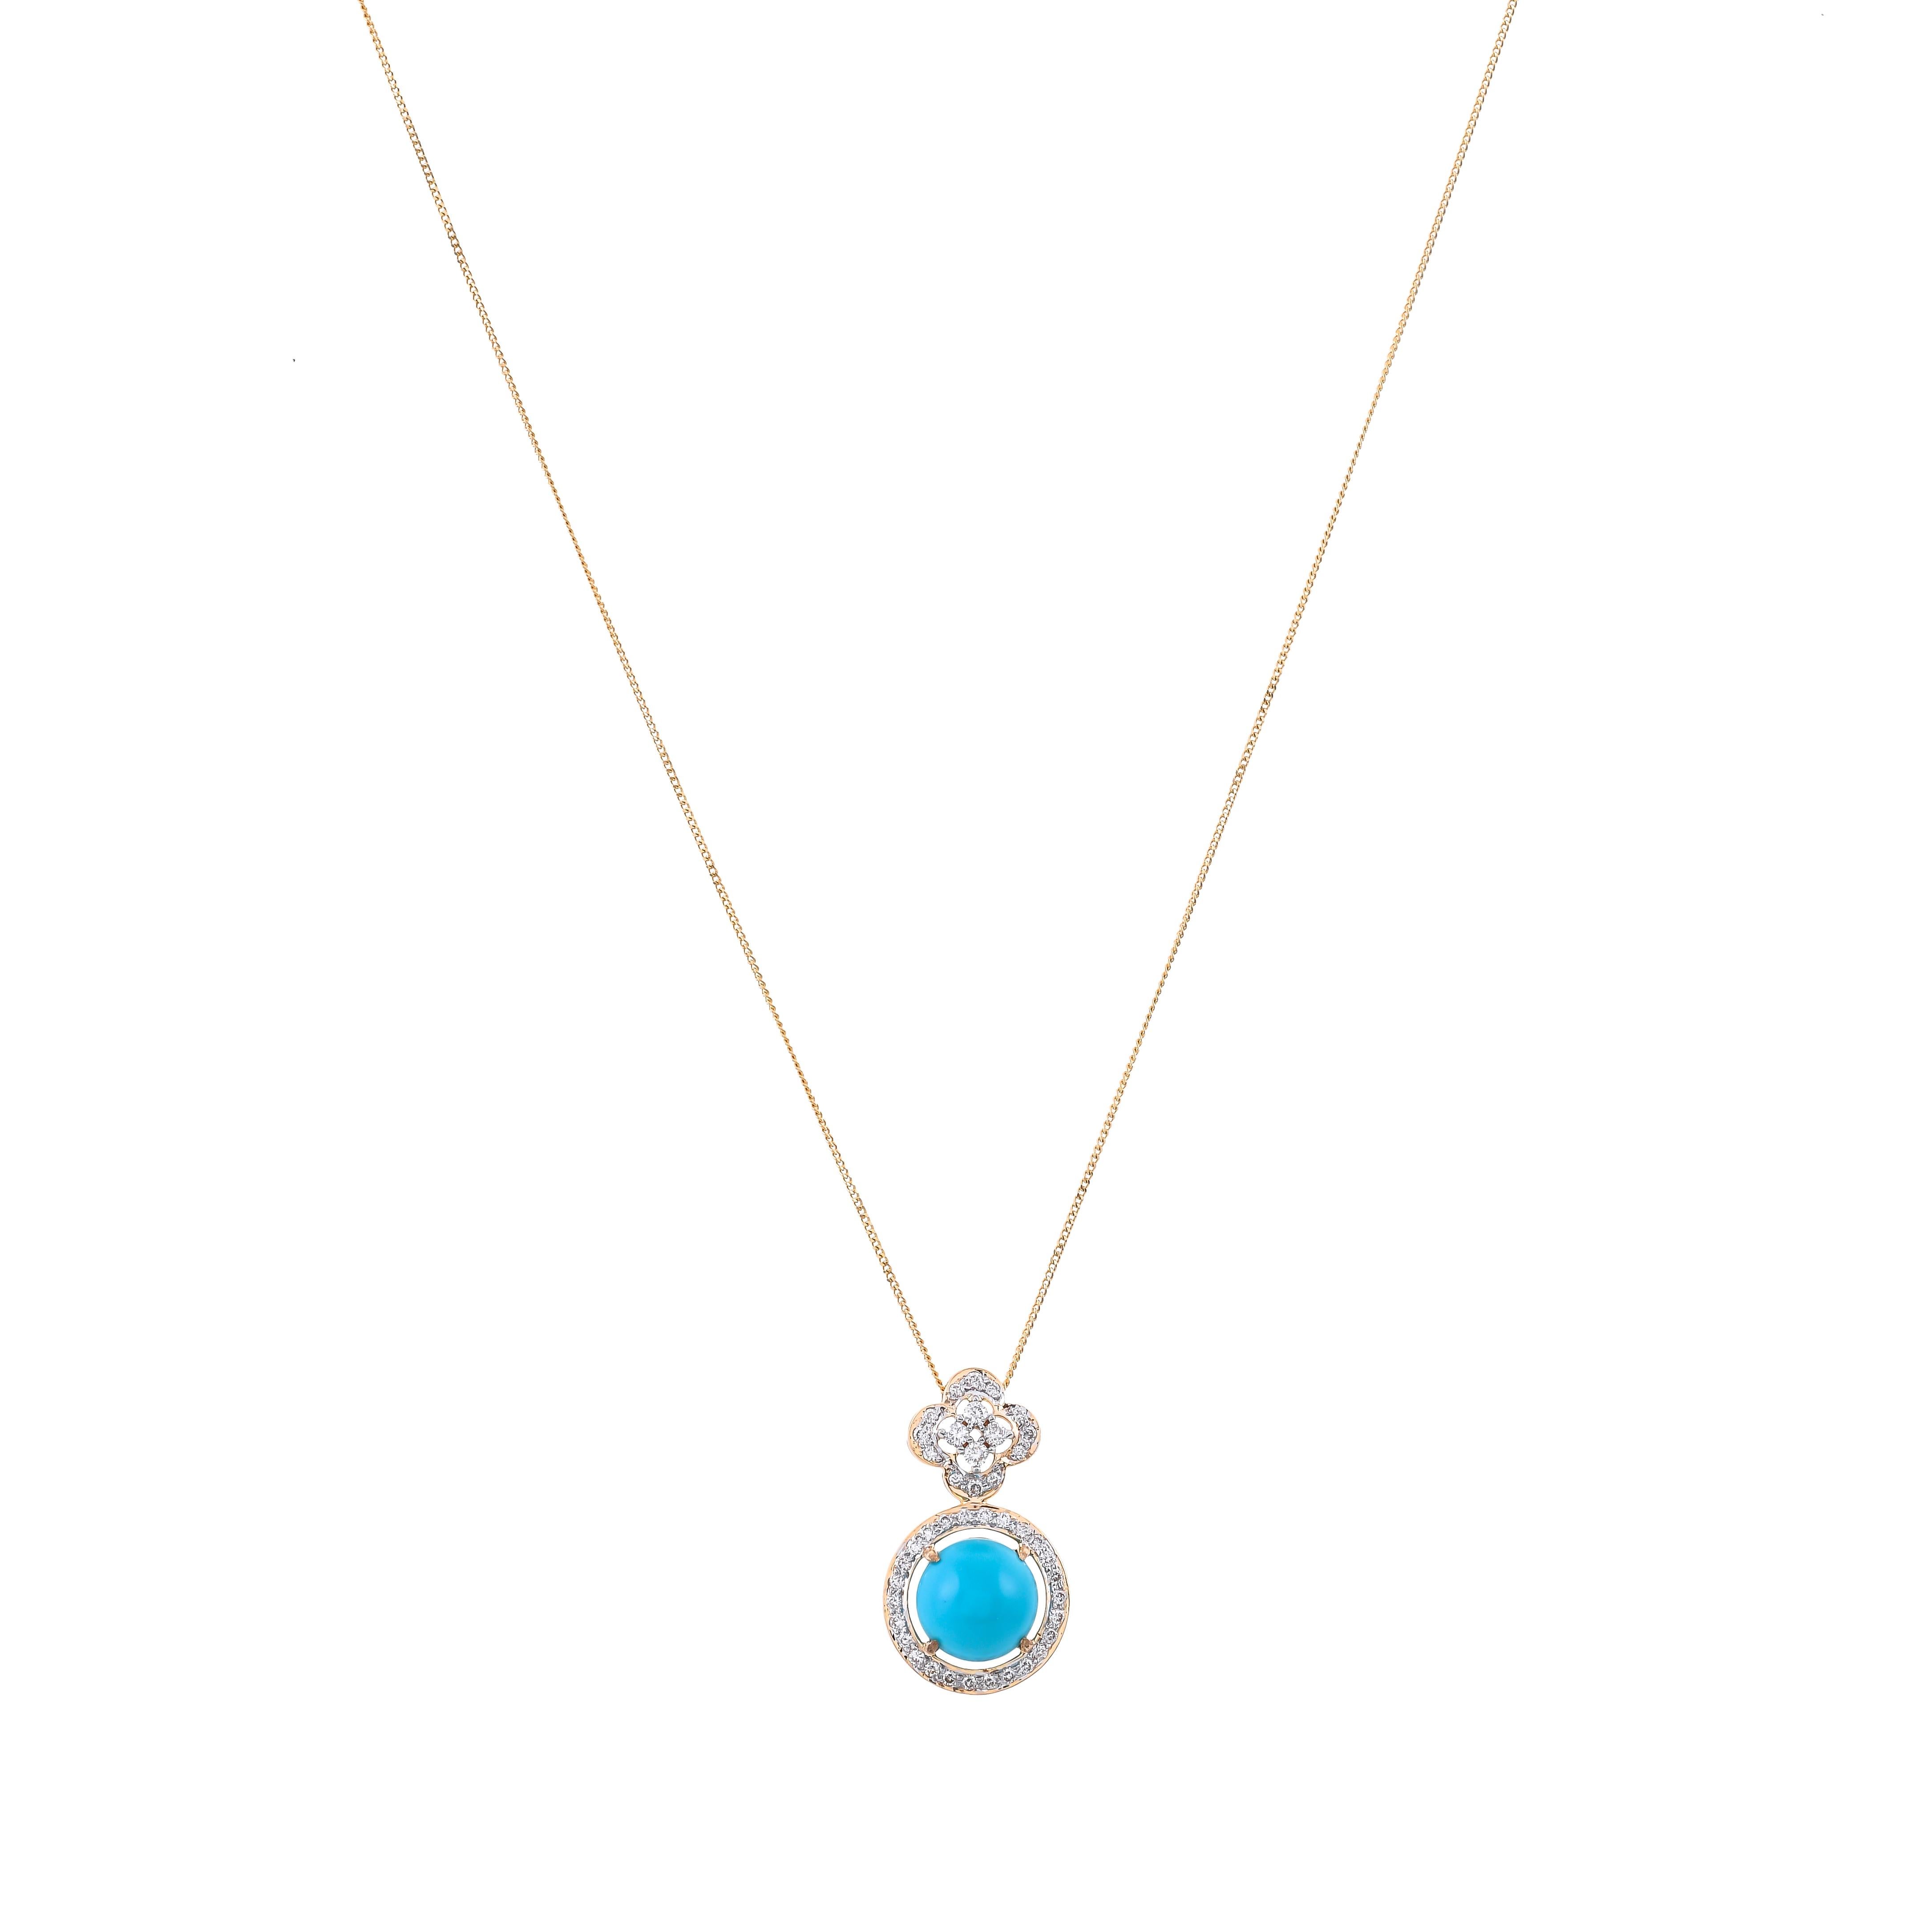 Crafted in 18 Karat yellow gold, this contemporary design pendant features a 3.61 caratS fine turquoise cabochon embellished with 0.49 caratS pave set diamonds.
Add extra sparkle with this precious and one of a kind piece.
Stone Size- 10x10
Total